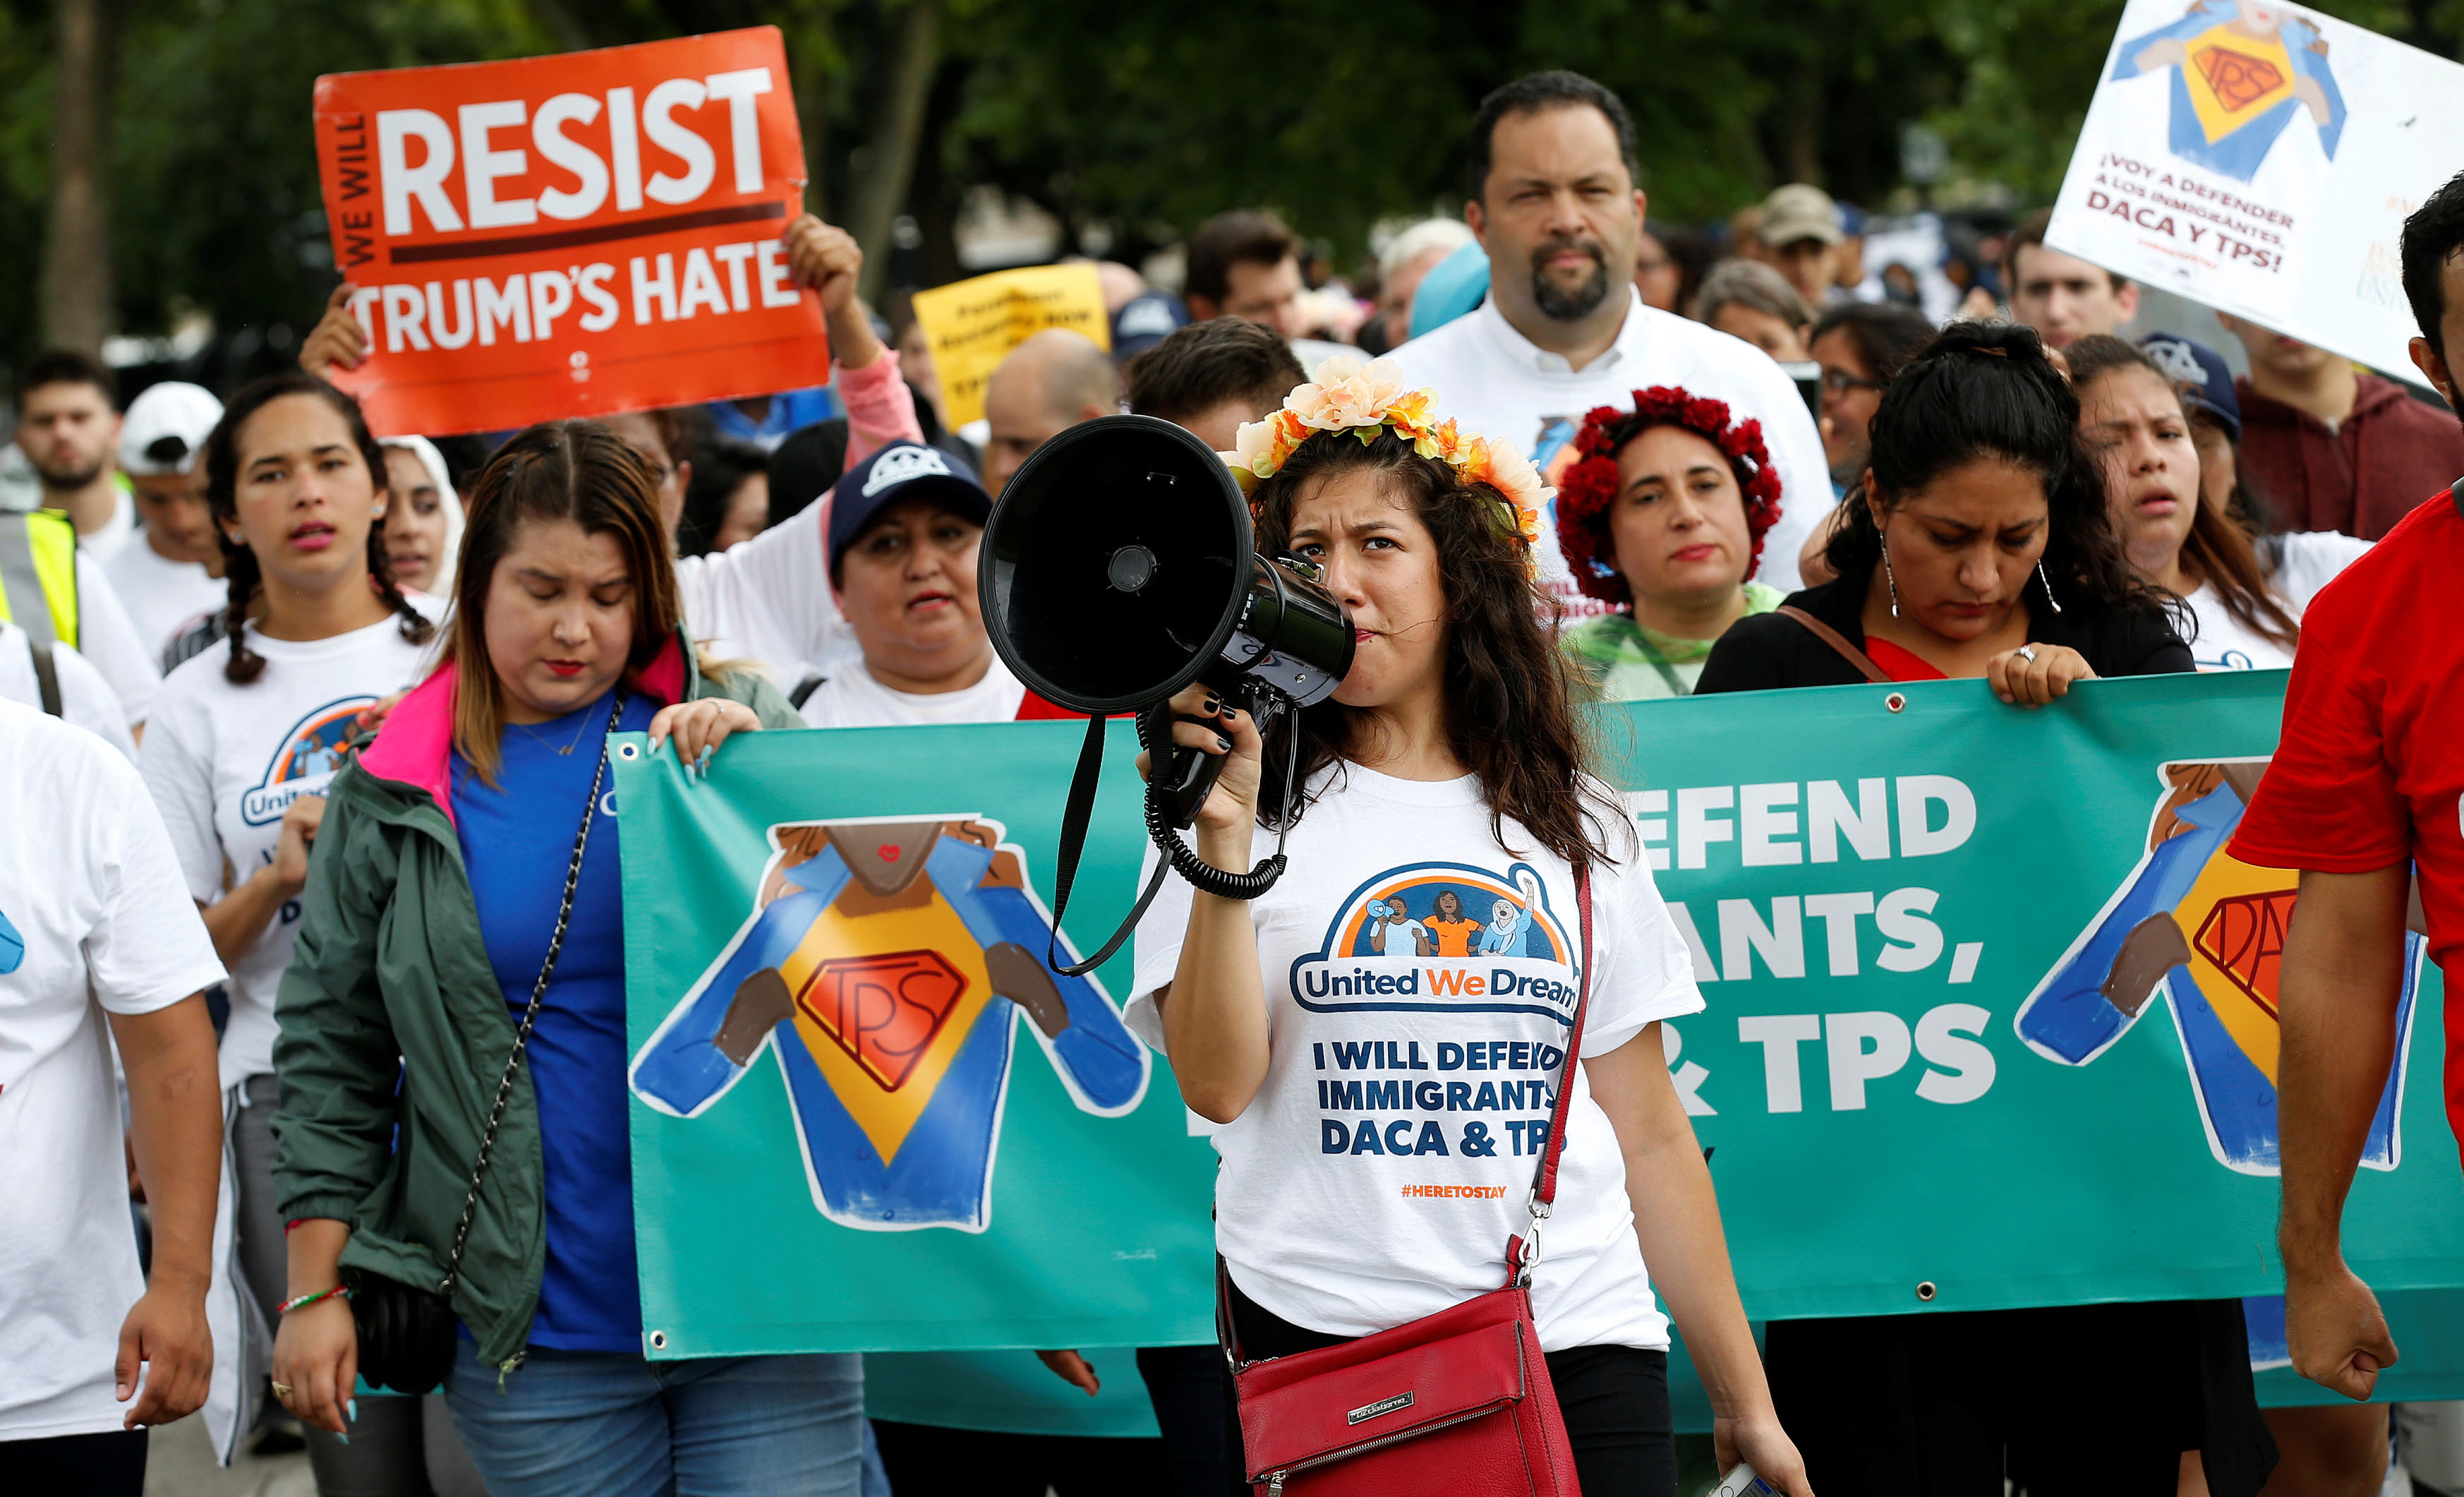 Demonstrators carrying signs march during a rally in Washington, U.S., August 15, 2017.